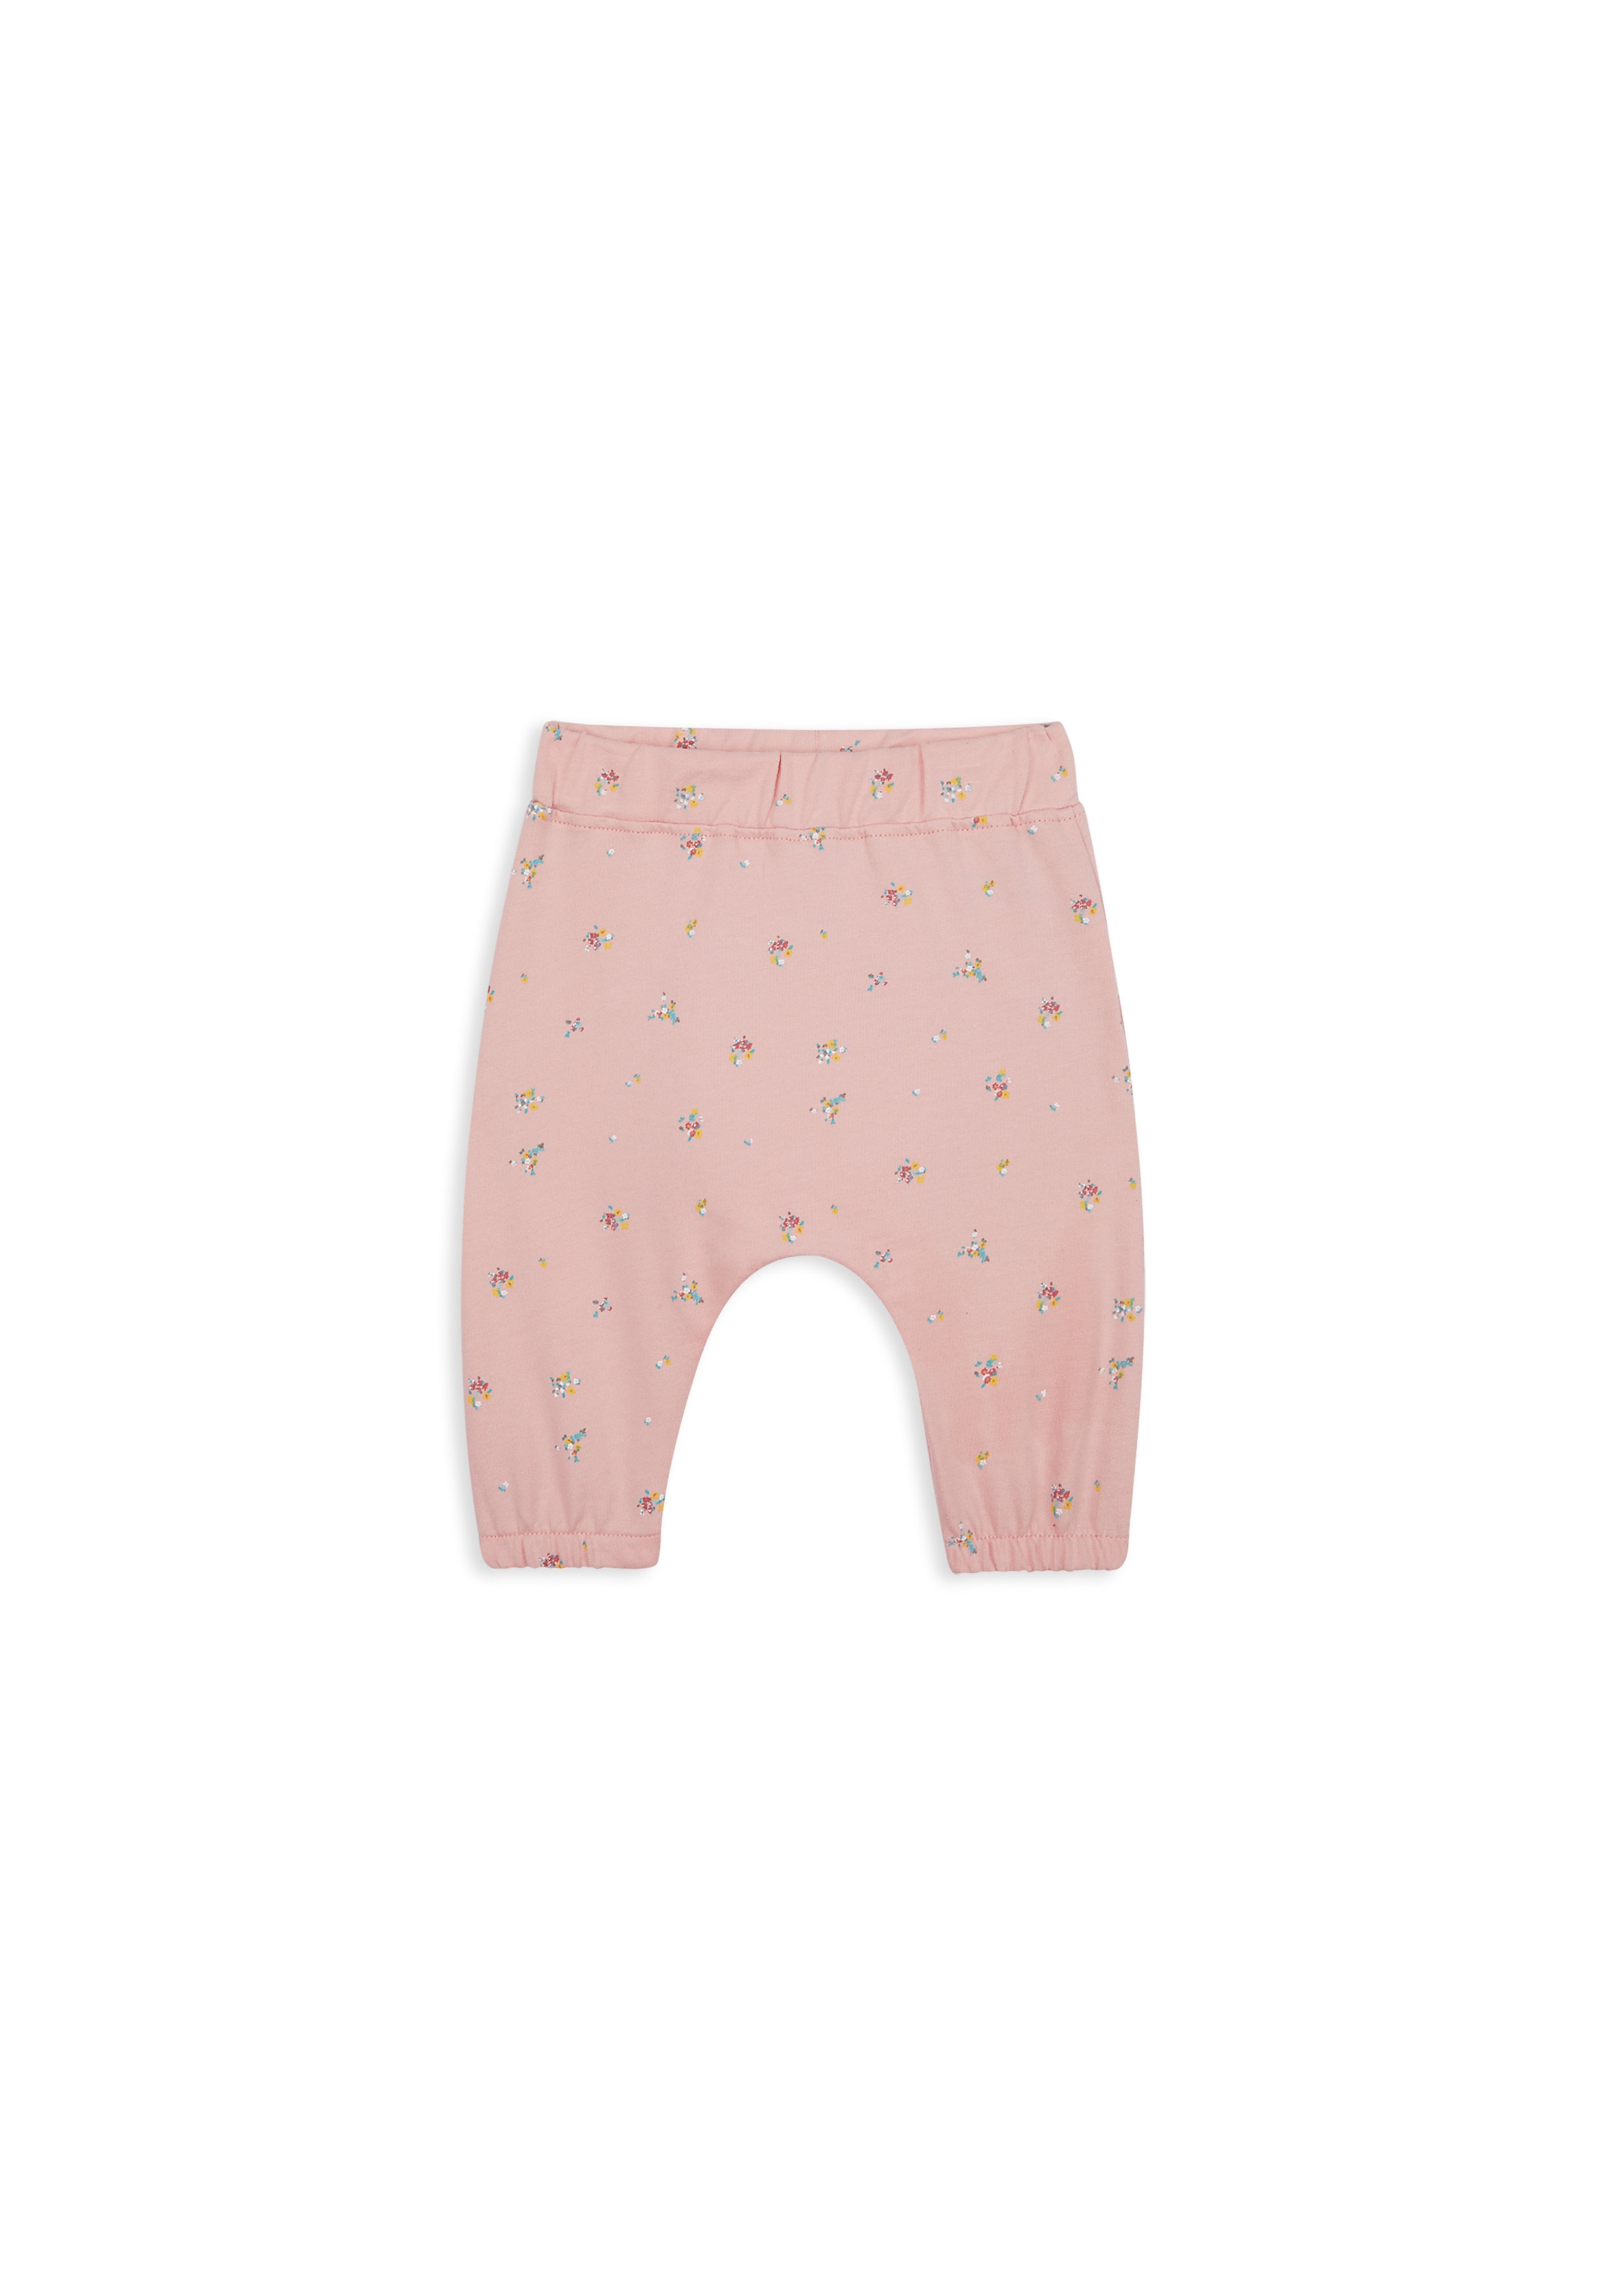 Mothercare | Girls Joggers 3D Ear Details - Pink